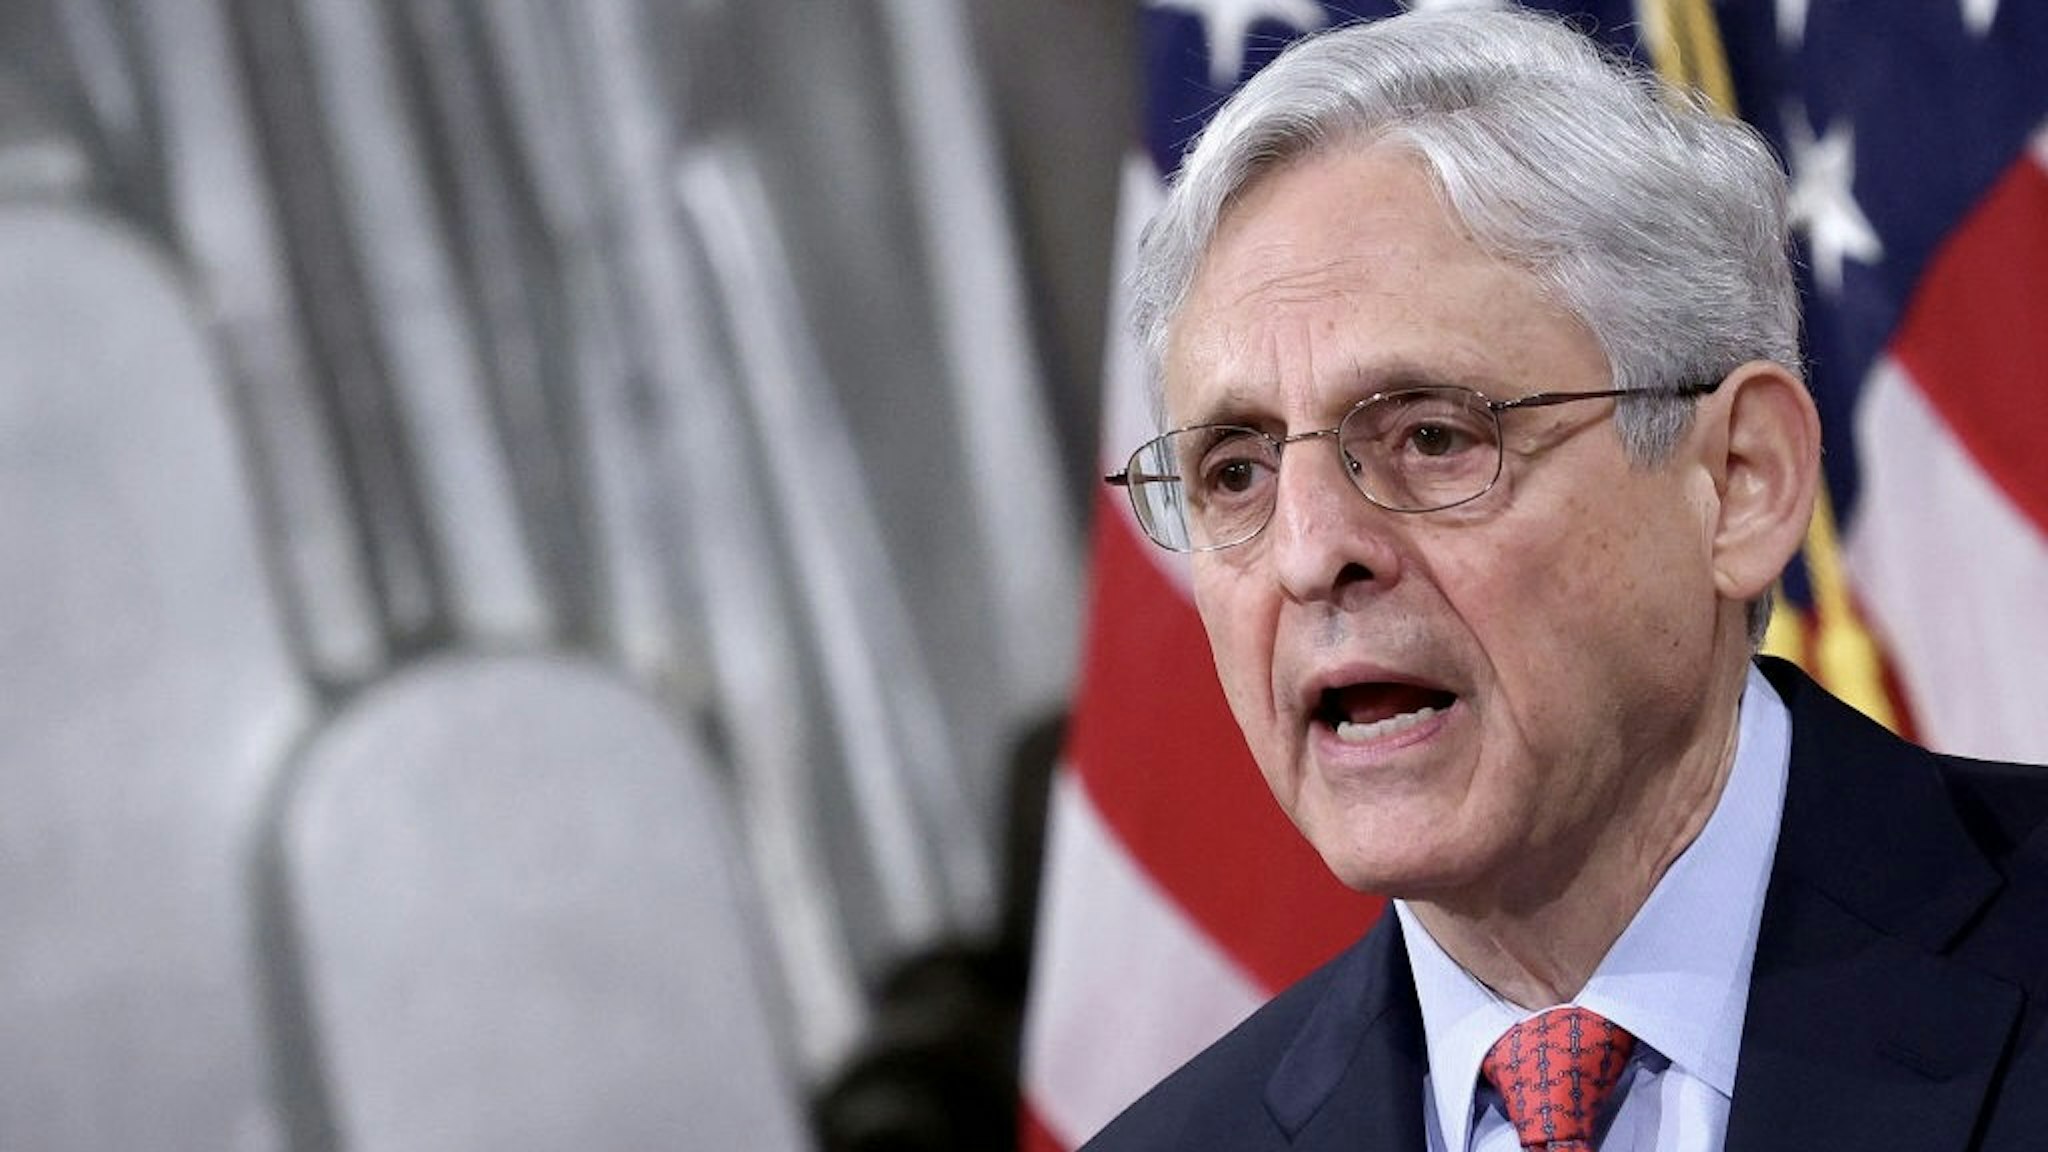 US-JUSTICE-GARLAND US Attorney General Merrick Garland speaks during an event at the Justice Department on June 15, 2021 in Washington, DC. - Garland addressed domestic terrorism during his remarks. (Photo by Win McNamee / POOL / AFP) (Photo by WIN MCNAMEE/POOL/AFP via Getty Images) WIN MCNAMEE / Contributor via Getty Images